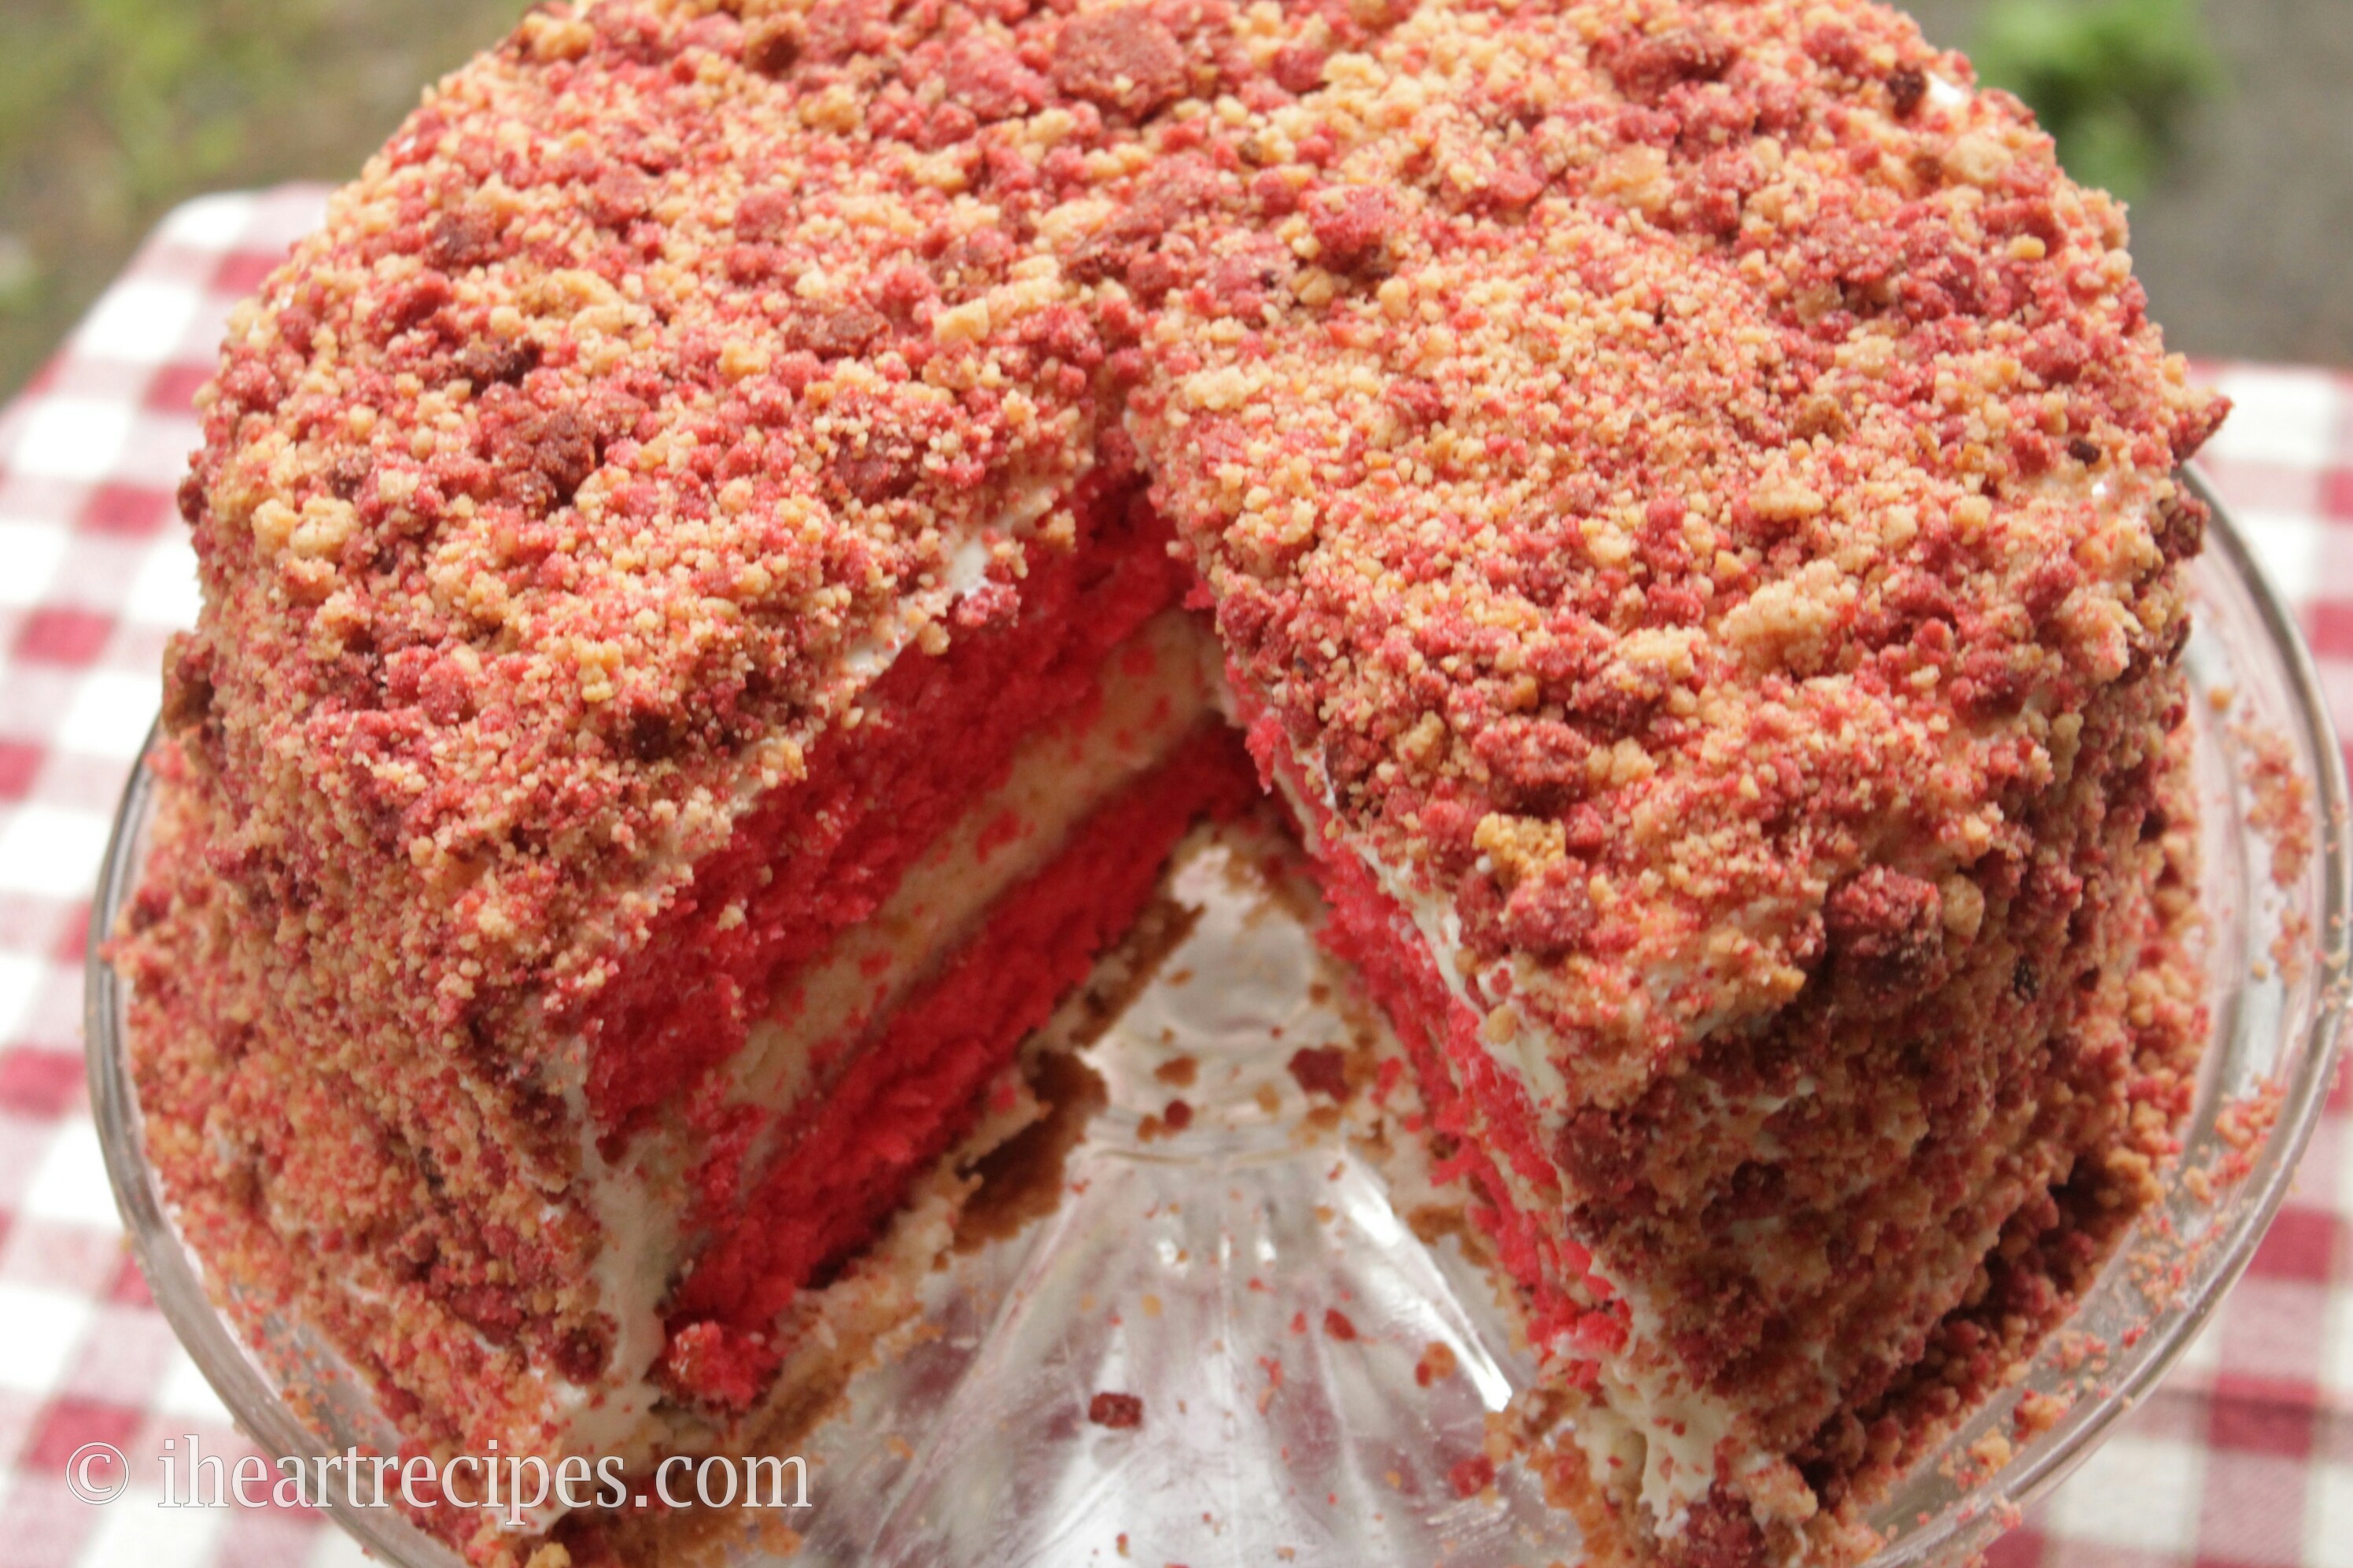 An overhead view of the strawberry shortcake cake, showing the crunchy strawberry cookie coating around the entire cake. A single slice is cut out, revealing the layers of cheesecake and strawberry cake inside.